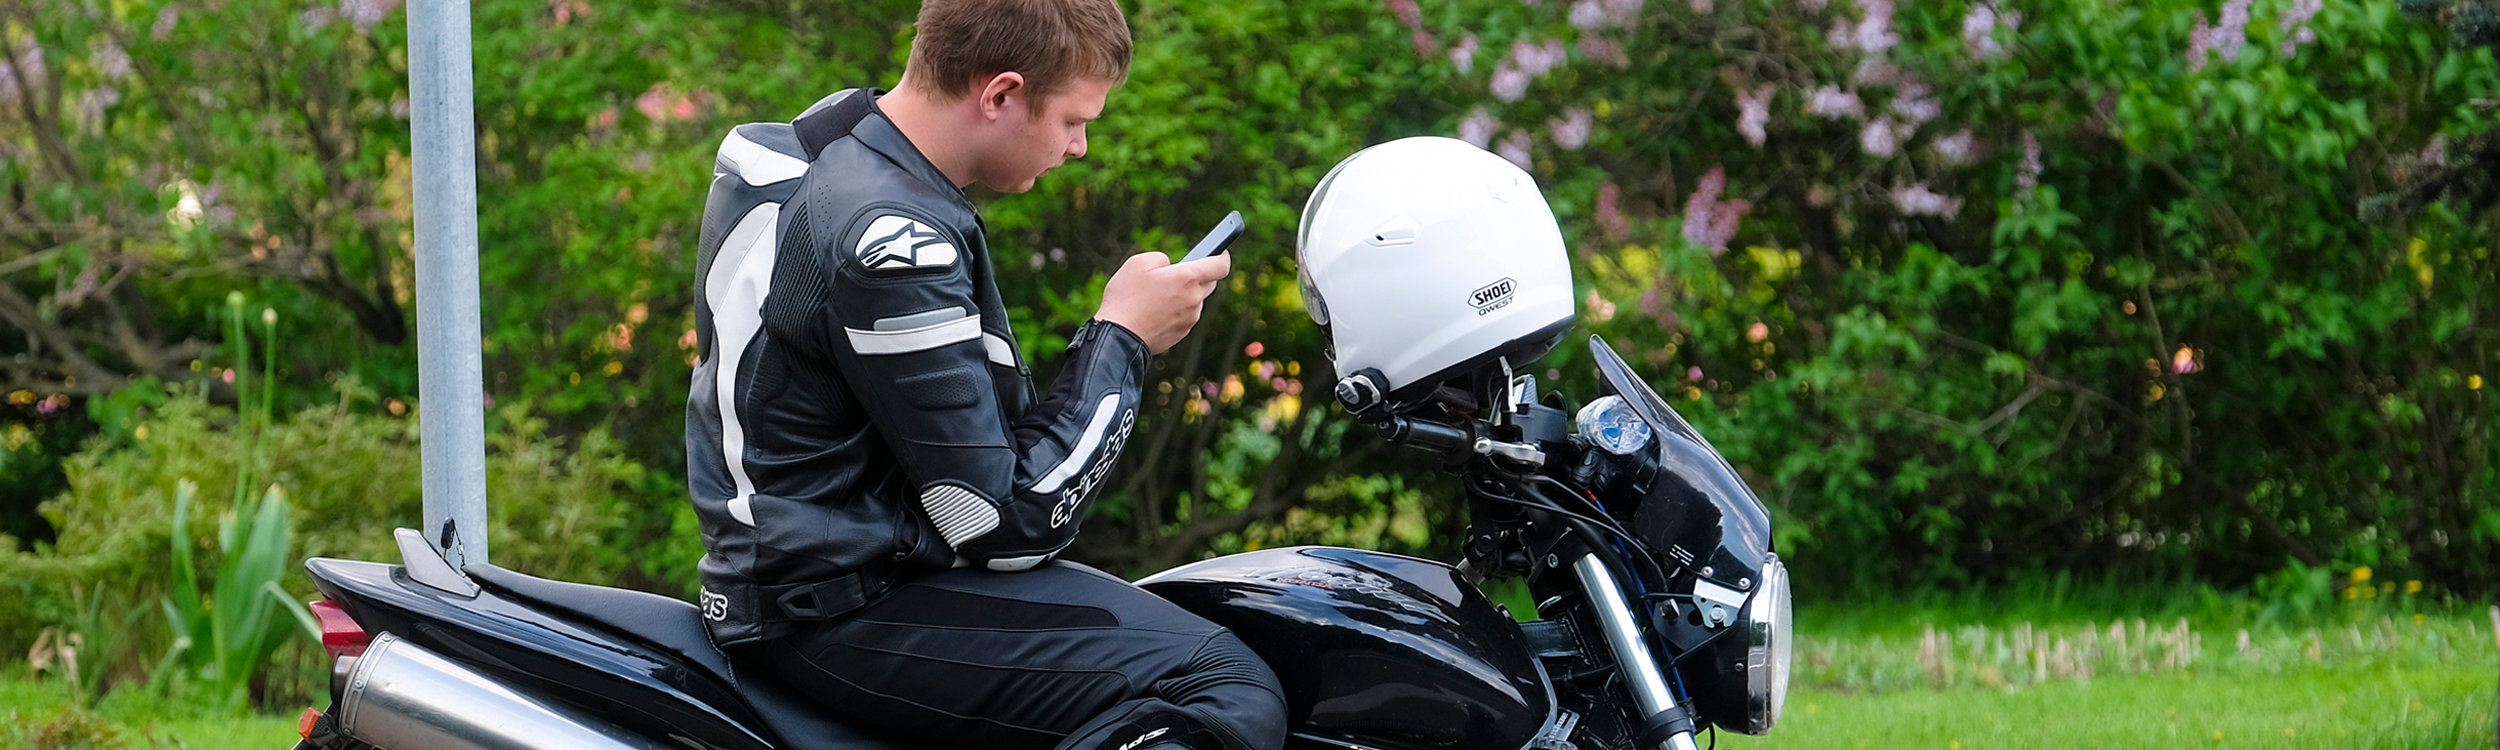 Motorcycle rider parked while checking mobile phone.